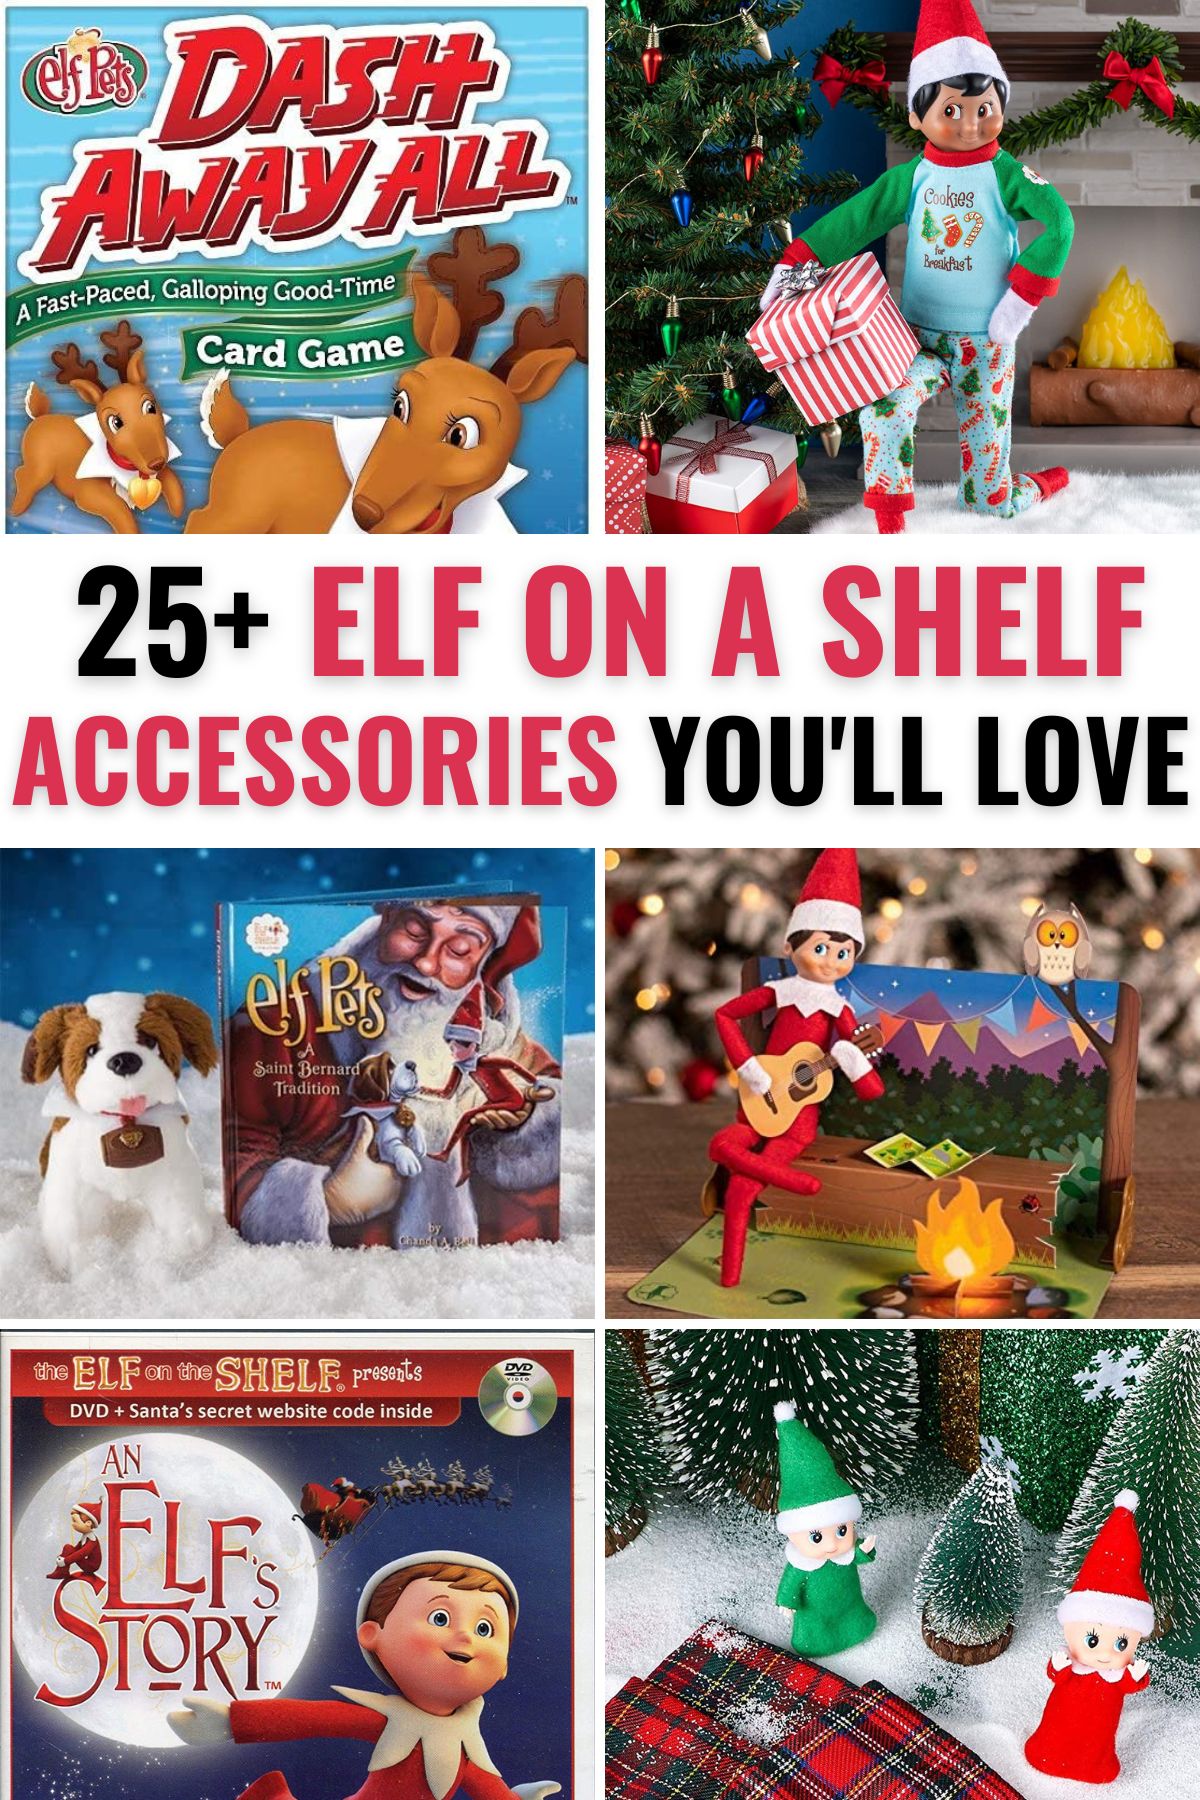 The Elf on the Shelf Elf Pets Traditions Complete Set: Saint